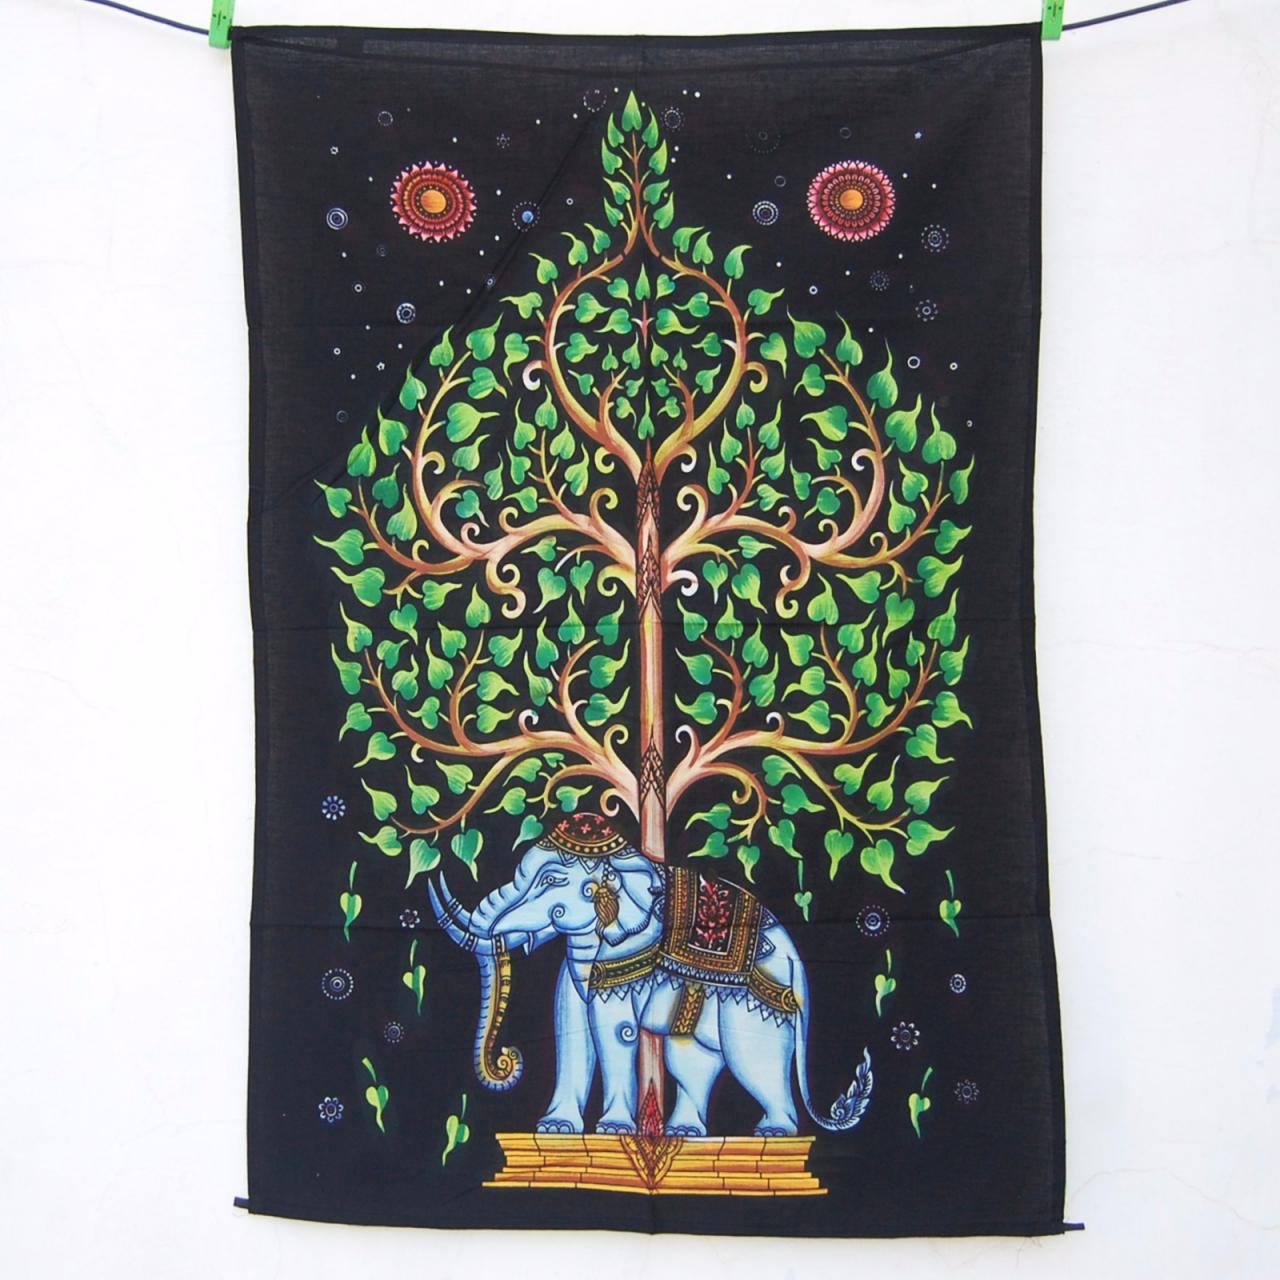 Ship Worldwide Small Green Elephant Tree-of-life-indian-tapestry-elephant-wall-hanging-throw-cotton-bedspread-decor